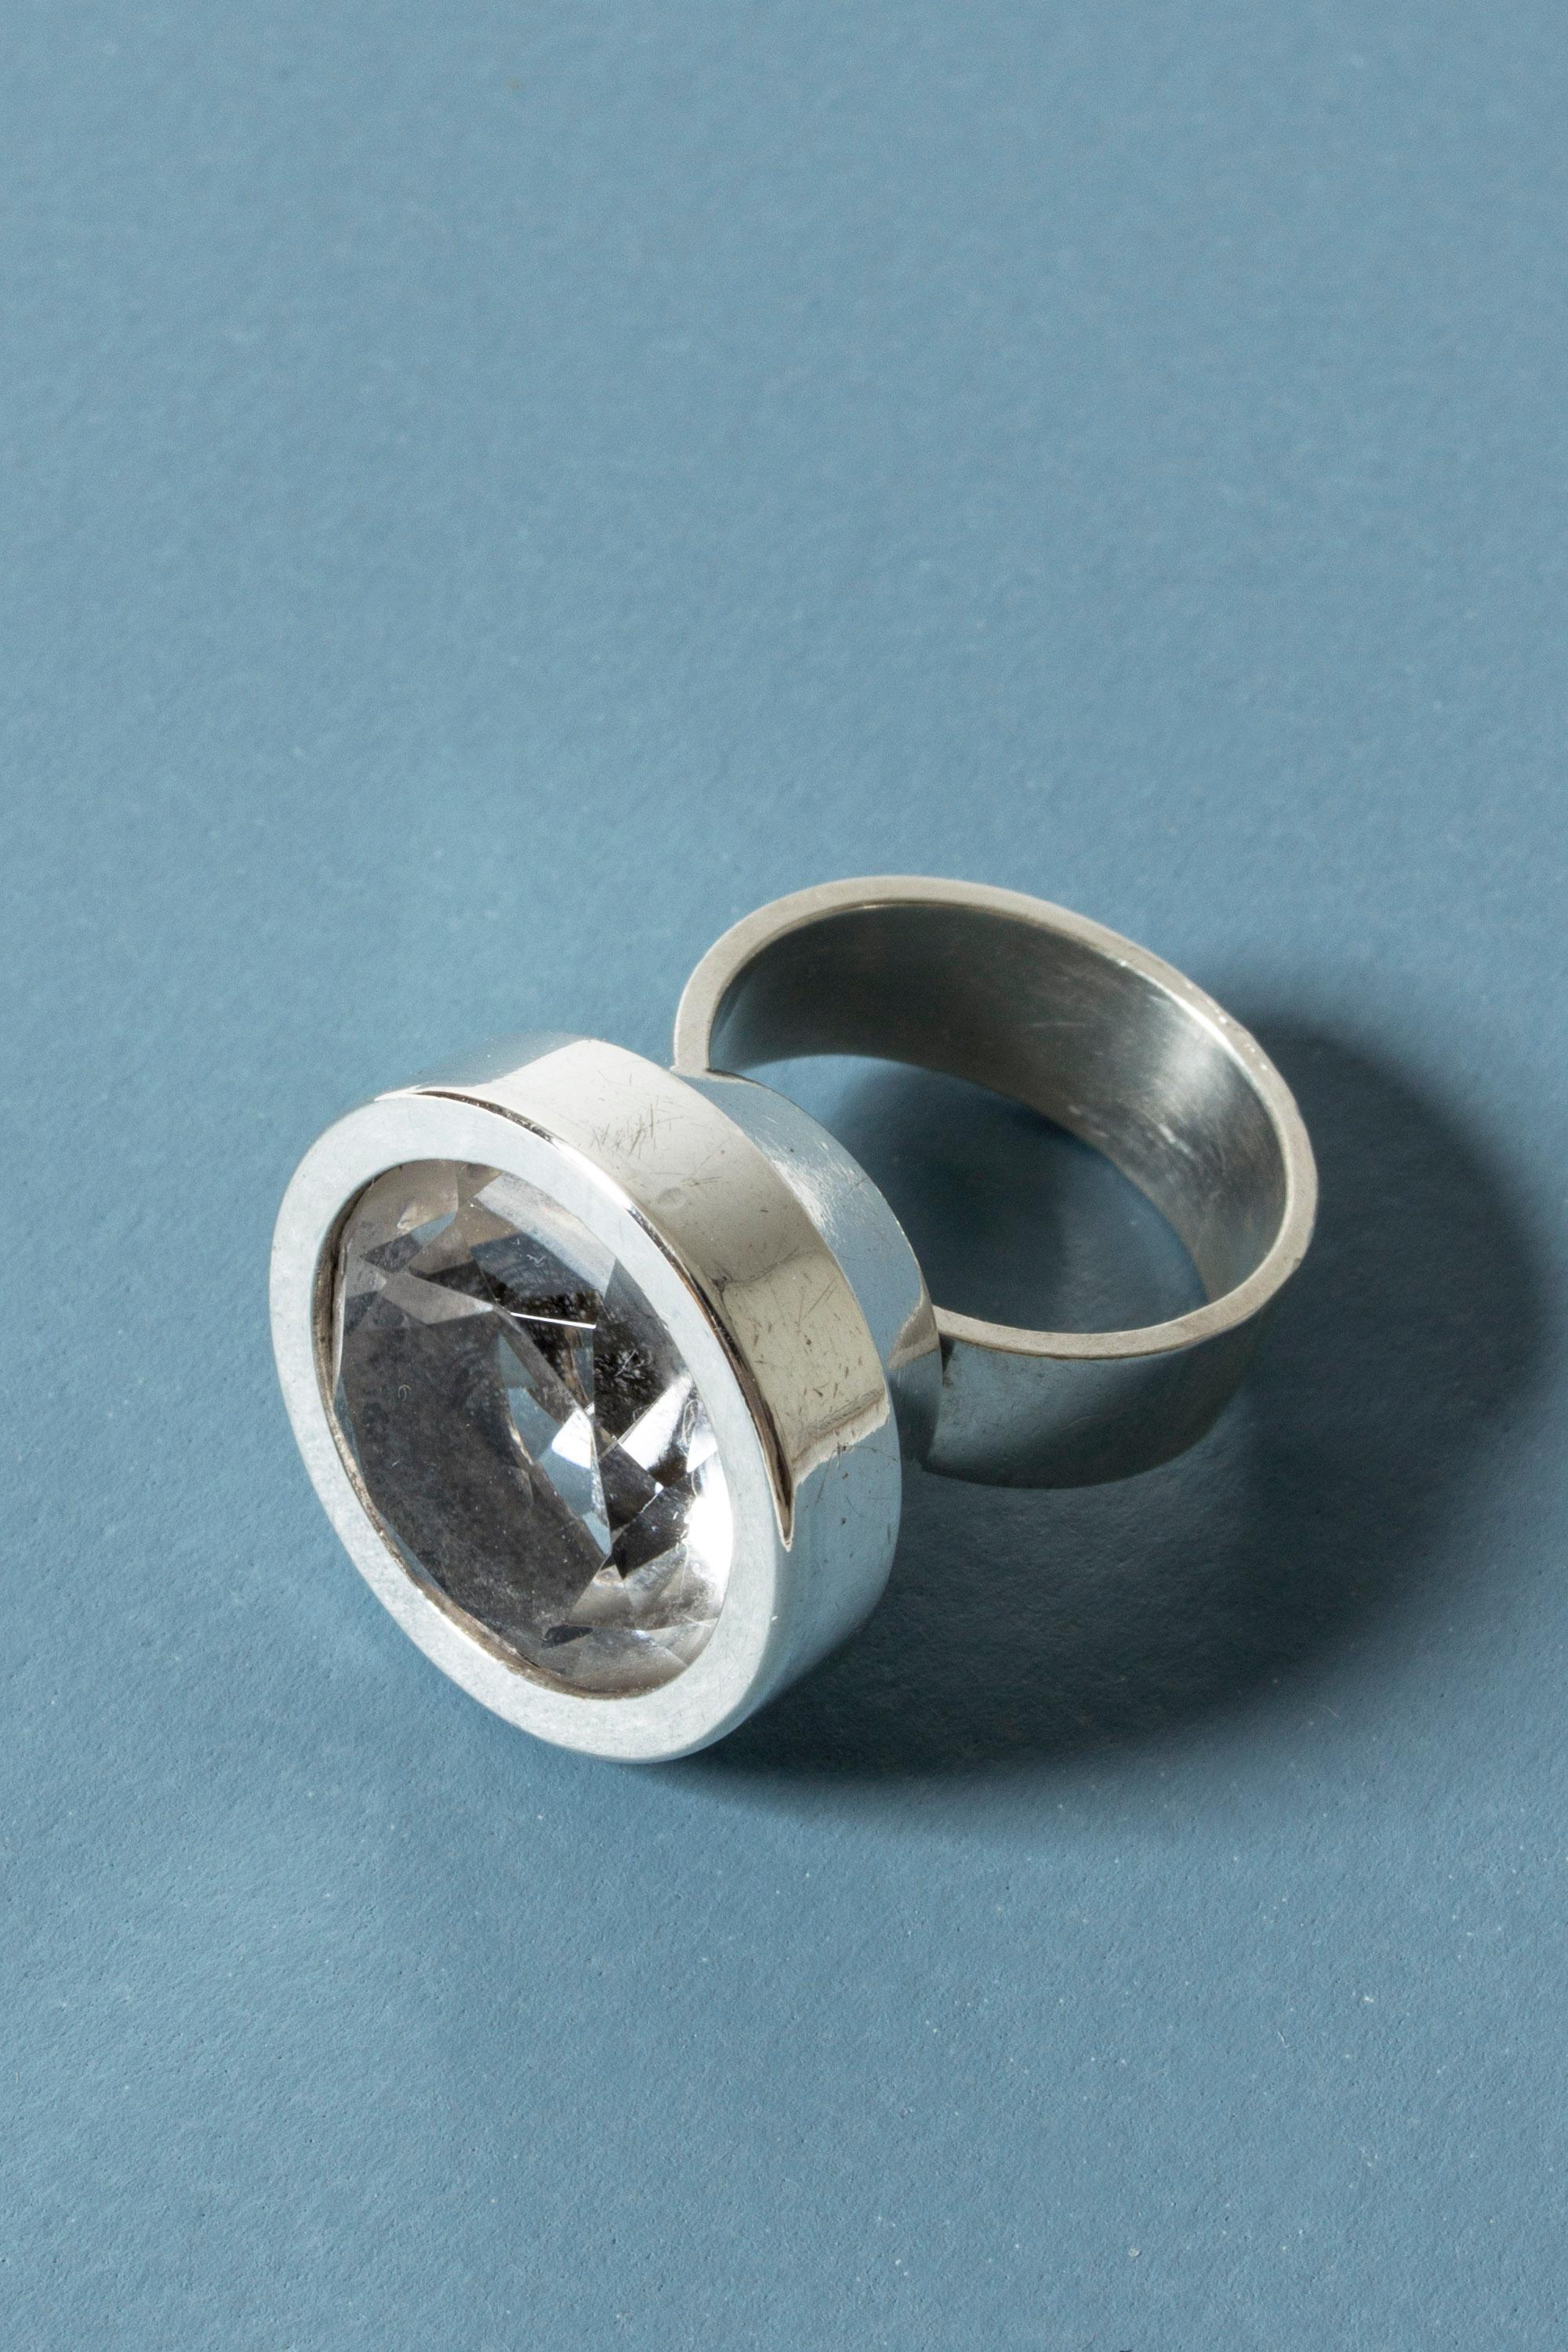 Amazing silver ring by Elis Kauppi, with a large rock crystal stone set in a smooth round frame. Very nice sheen in the stone from the facets.